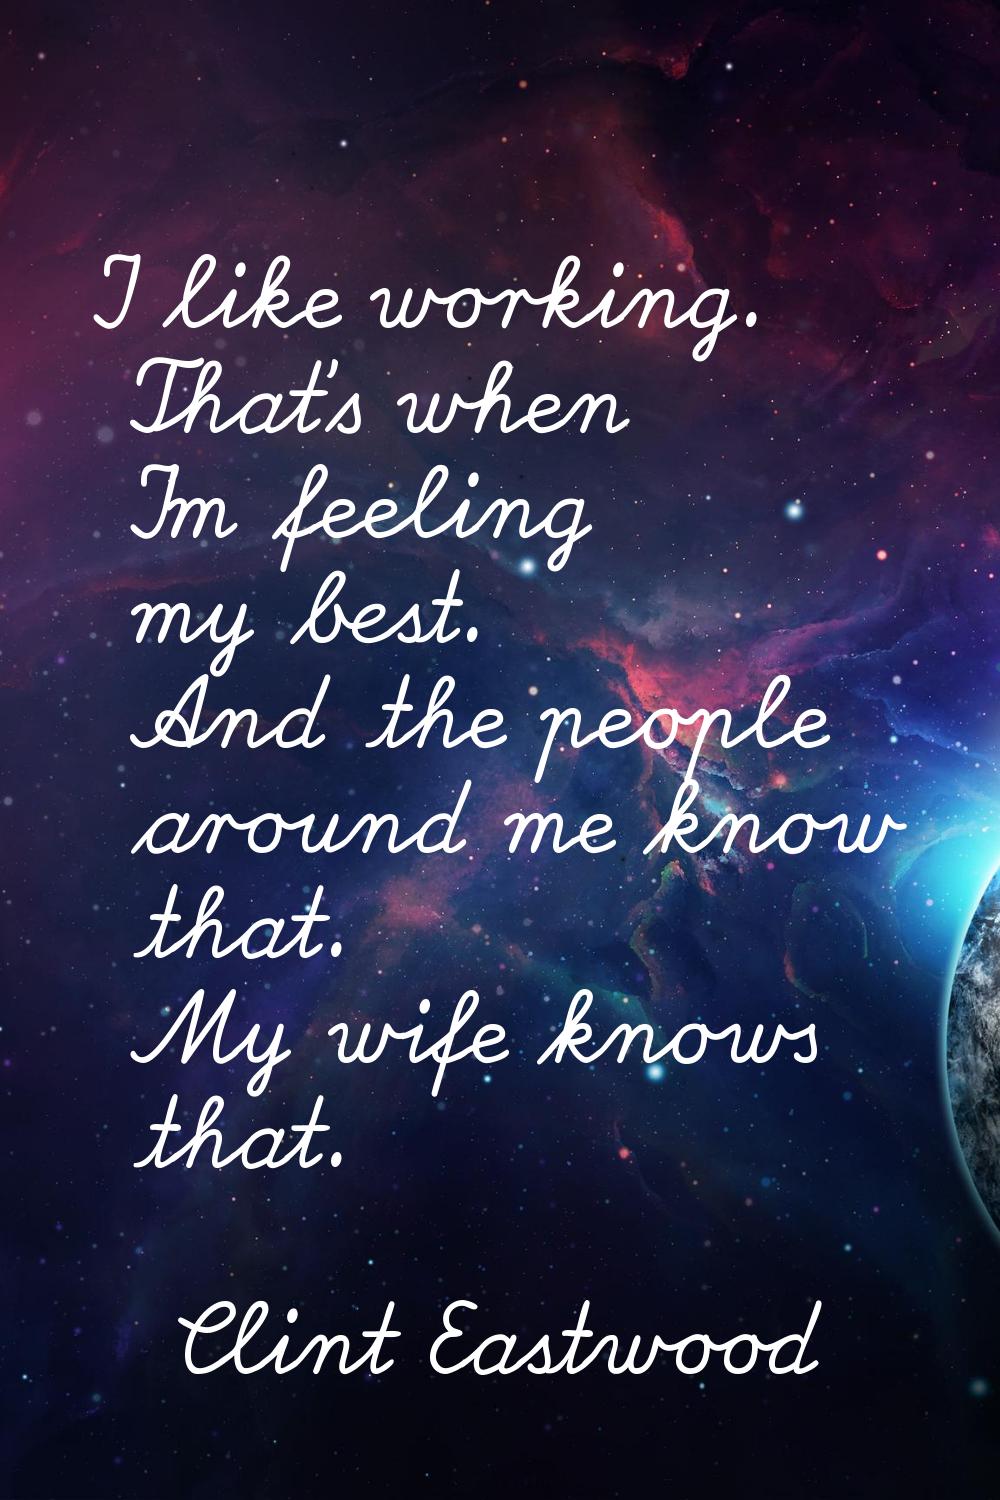 I like working. That's when I'm feeling my best. And the people around me know that. My wife knows 